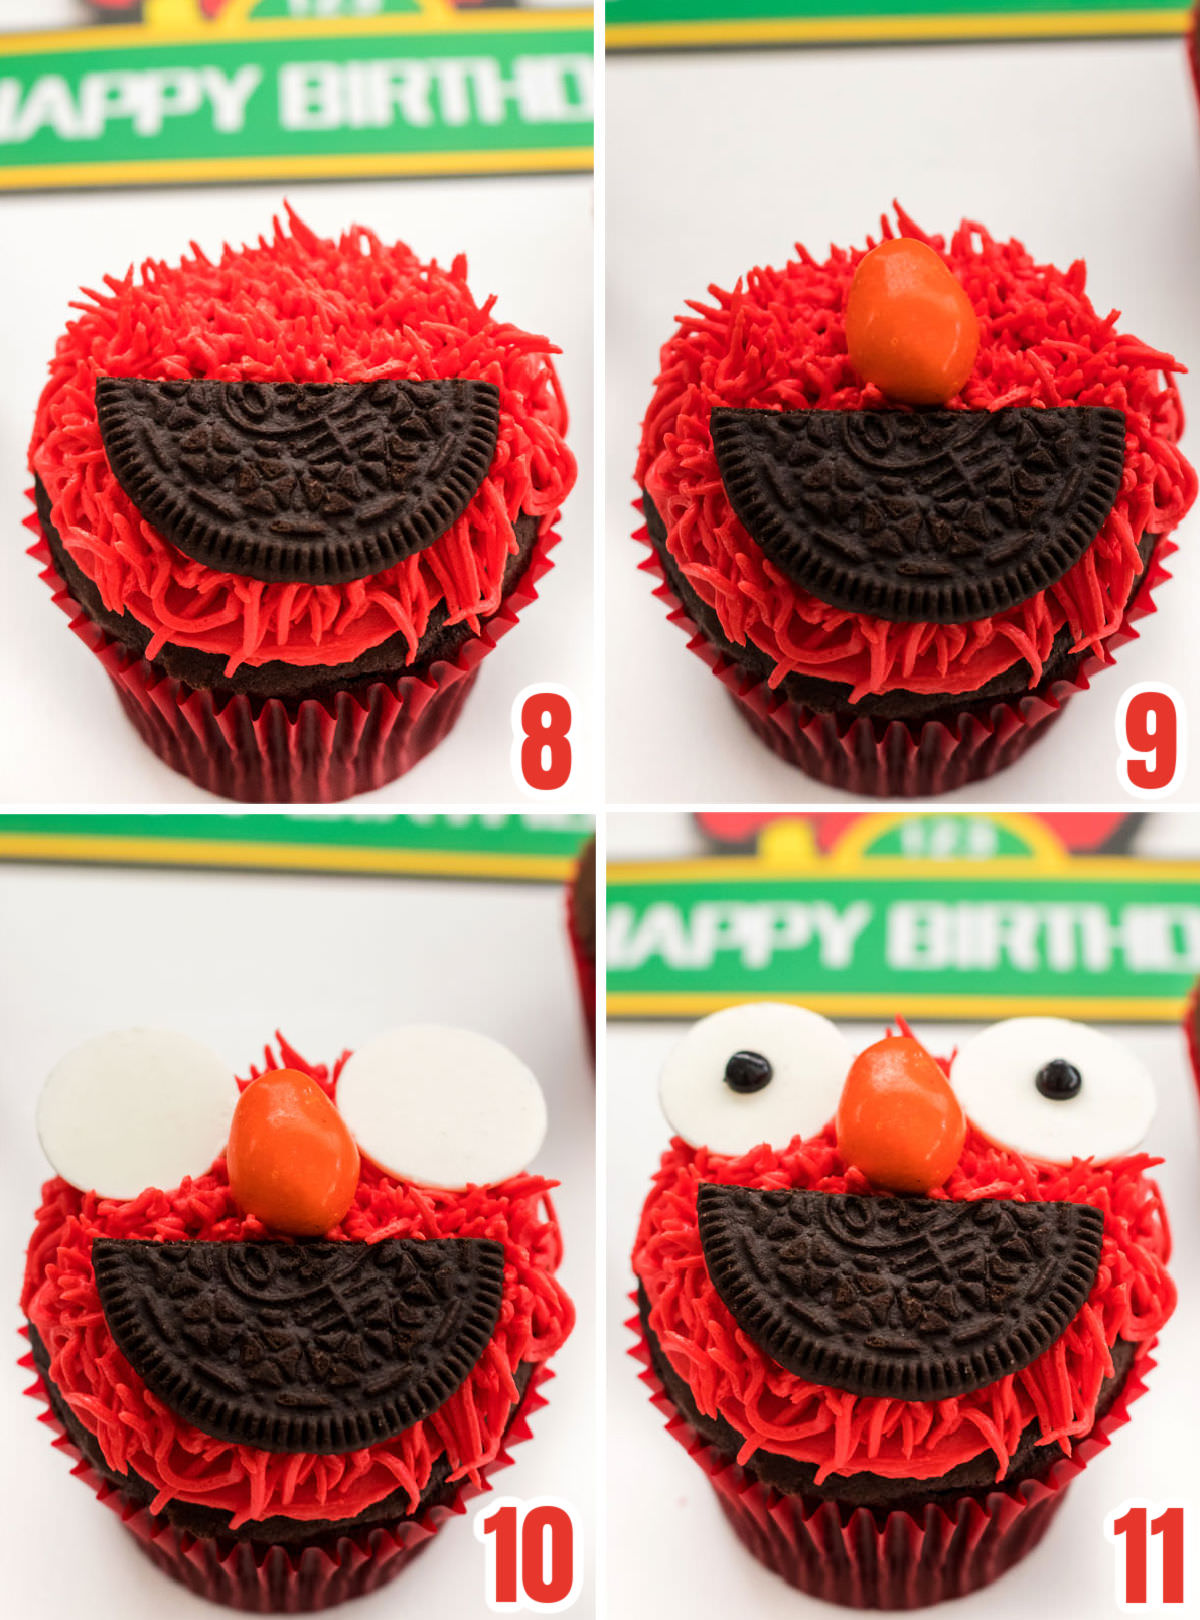 Collage image showing the steps for creating the Elmo face using Oreo Cookies, Candy Melts and an M&M nose.